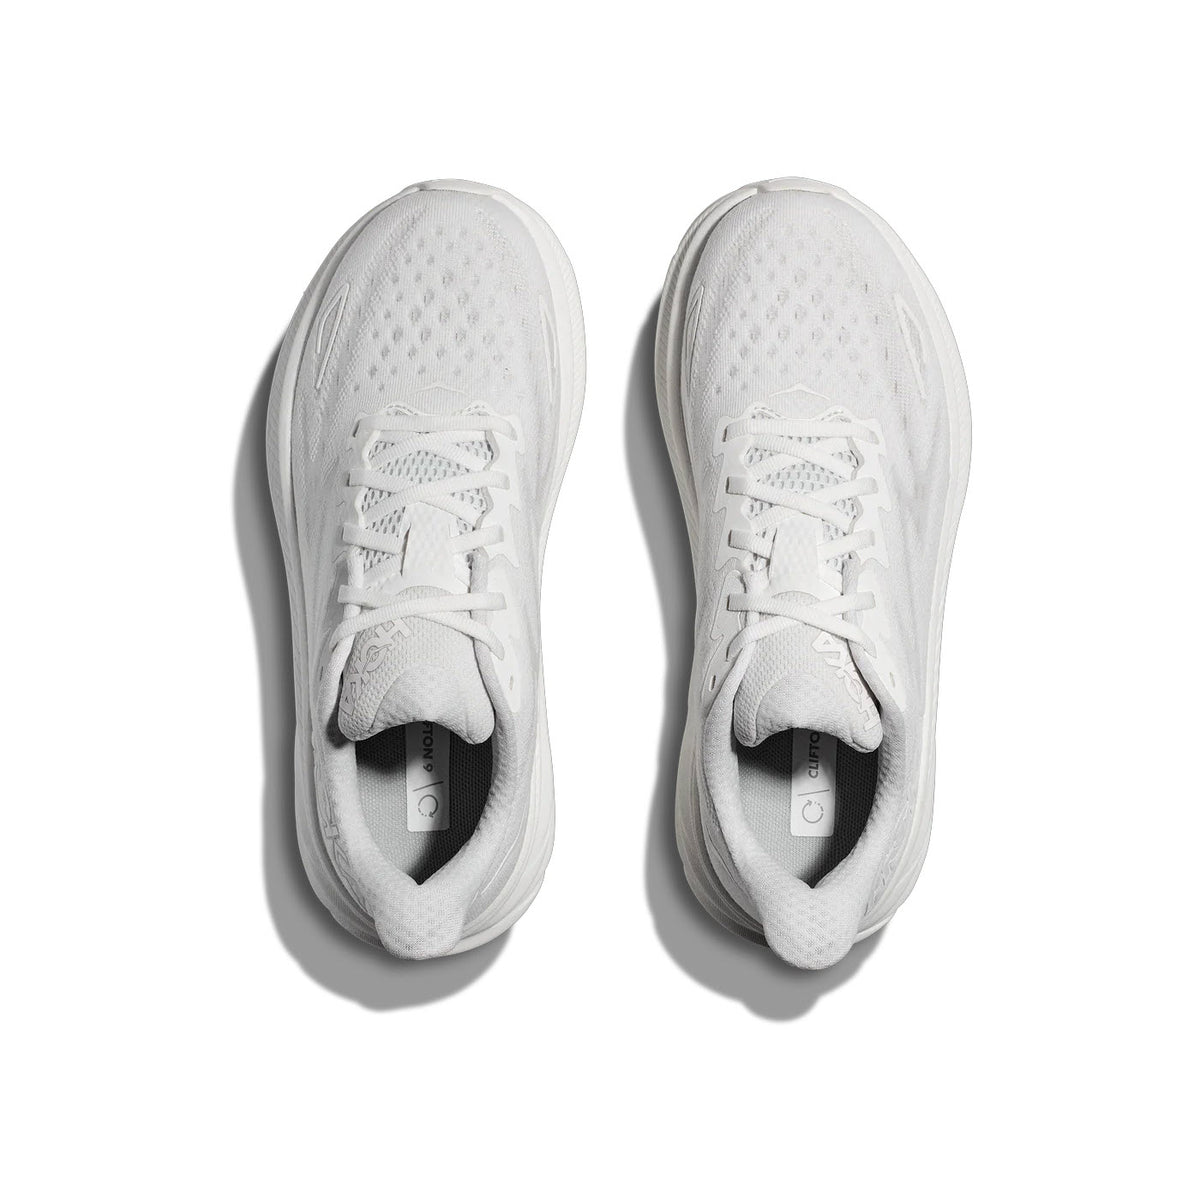 A pair of white Hoka Clifton 9 running shoes seen from above, featuring an improved outsole design.